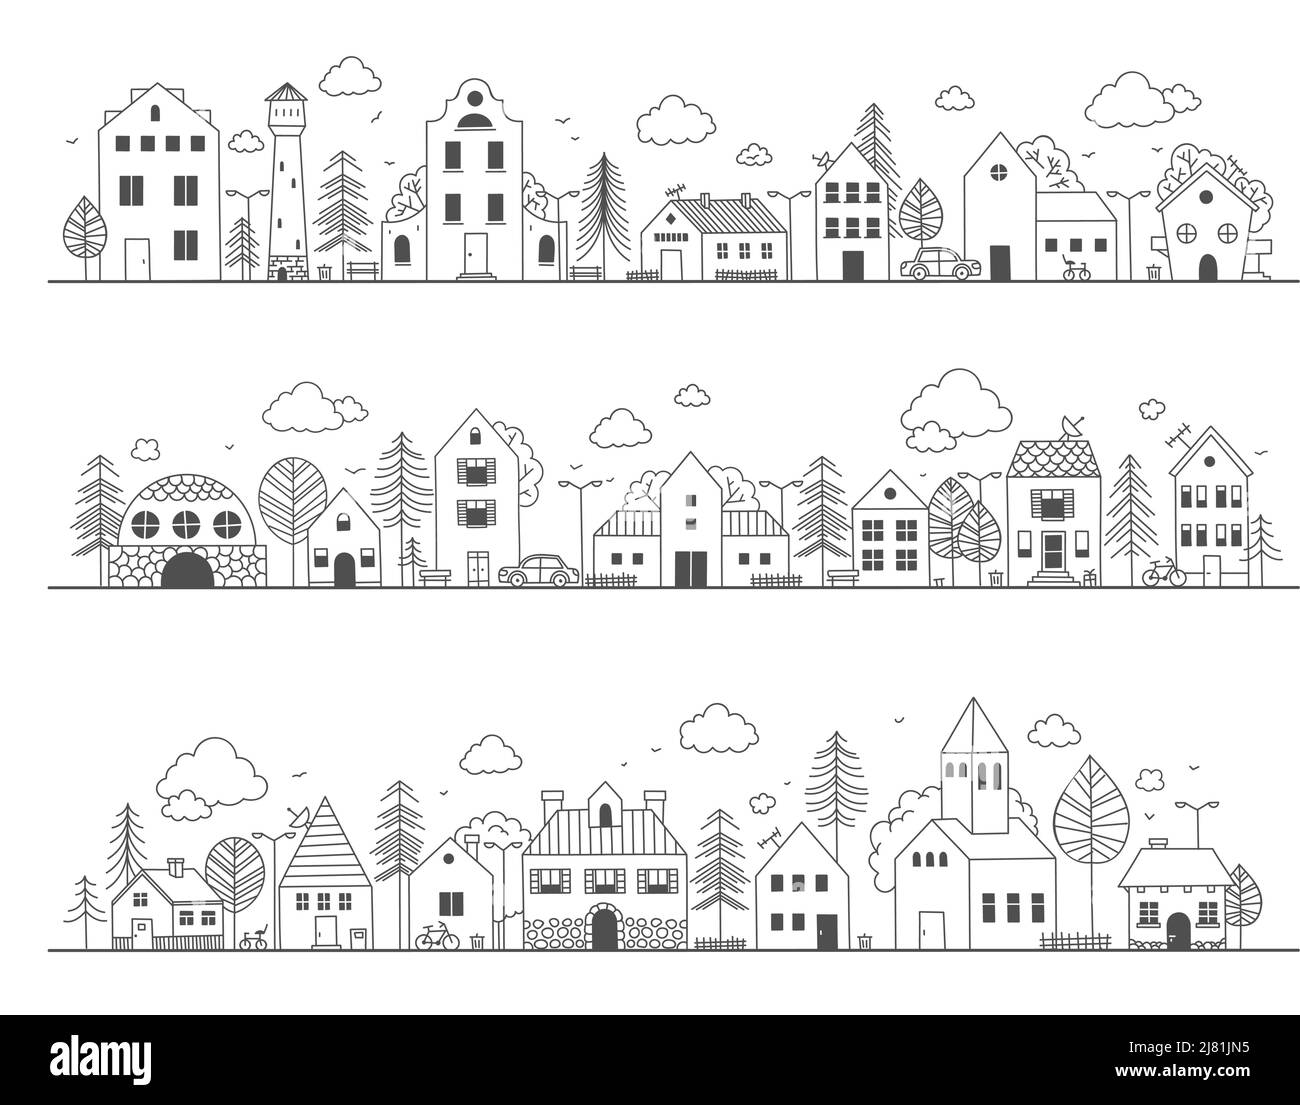 Doodle town street. Cute rural buildings with trees, hand drawn country neighborhood sketch with little houses. Vector childish scene Stock Vector